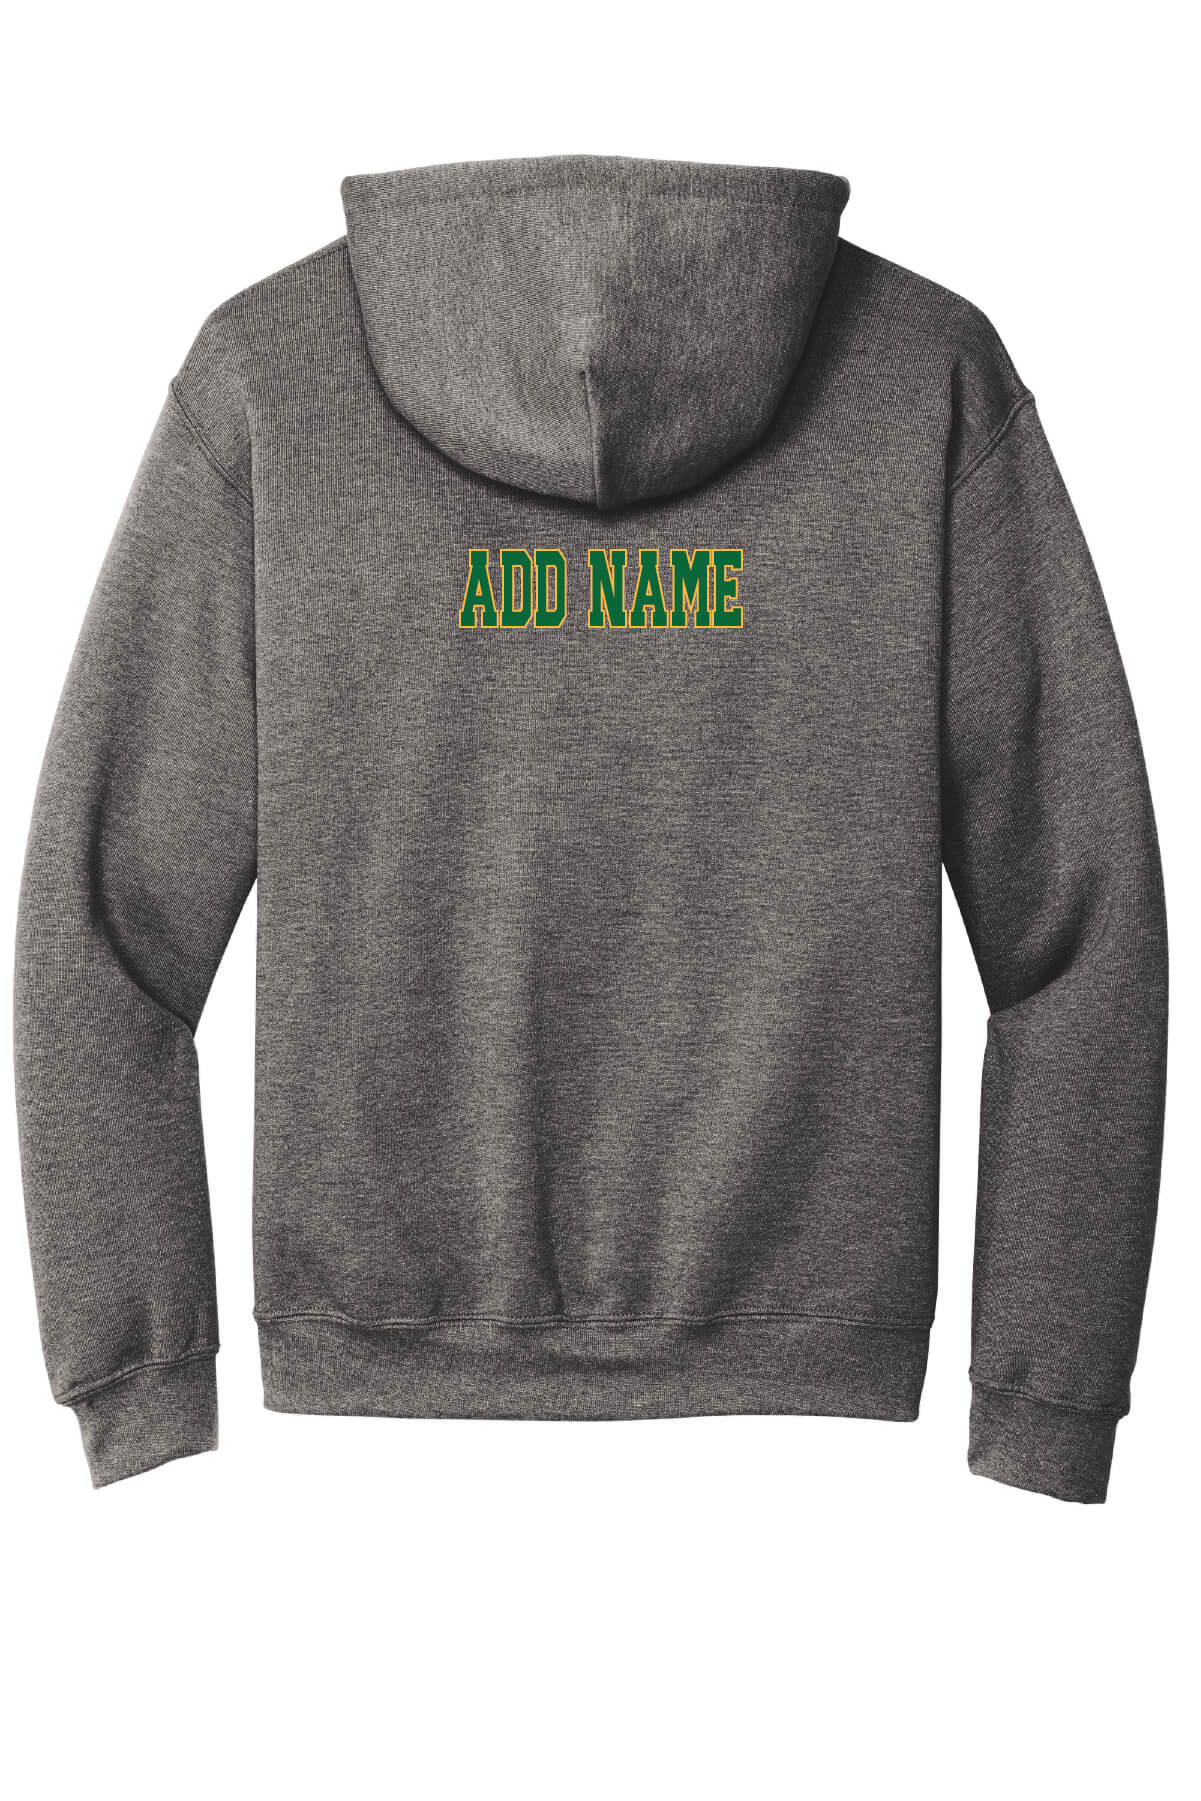 Notre Dame Spartans Hoodie back-gray